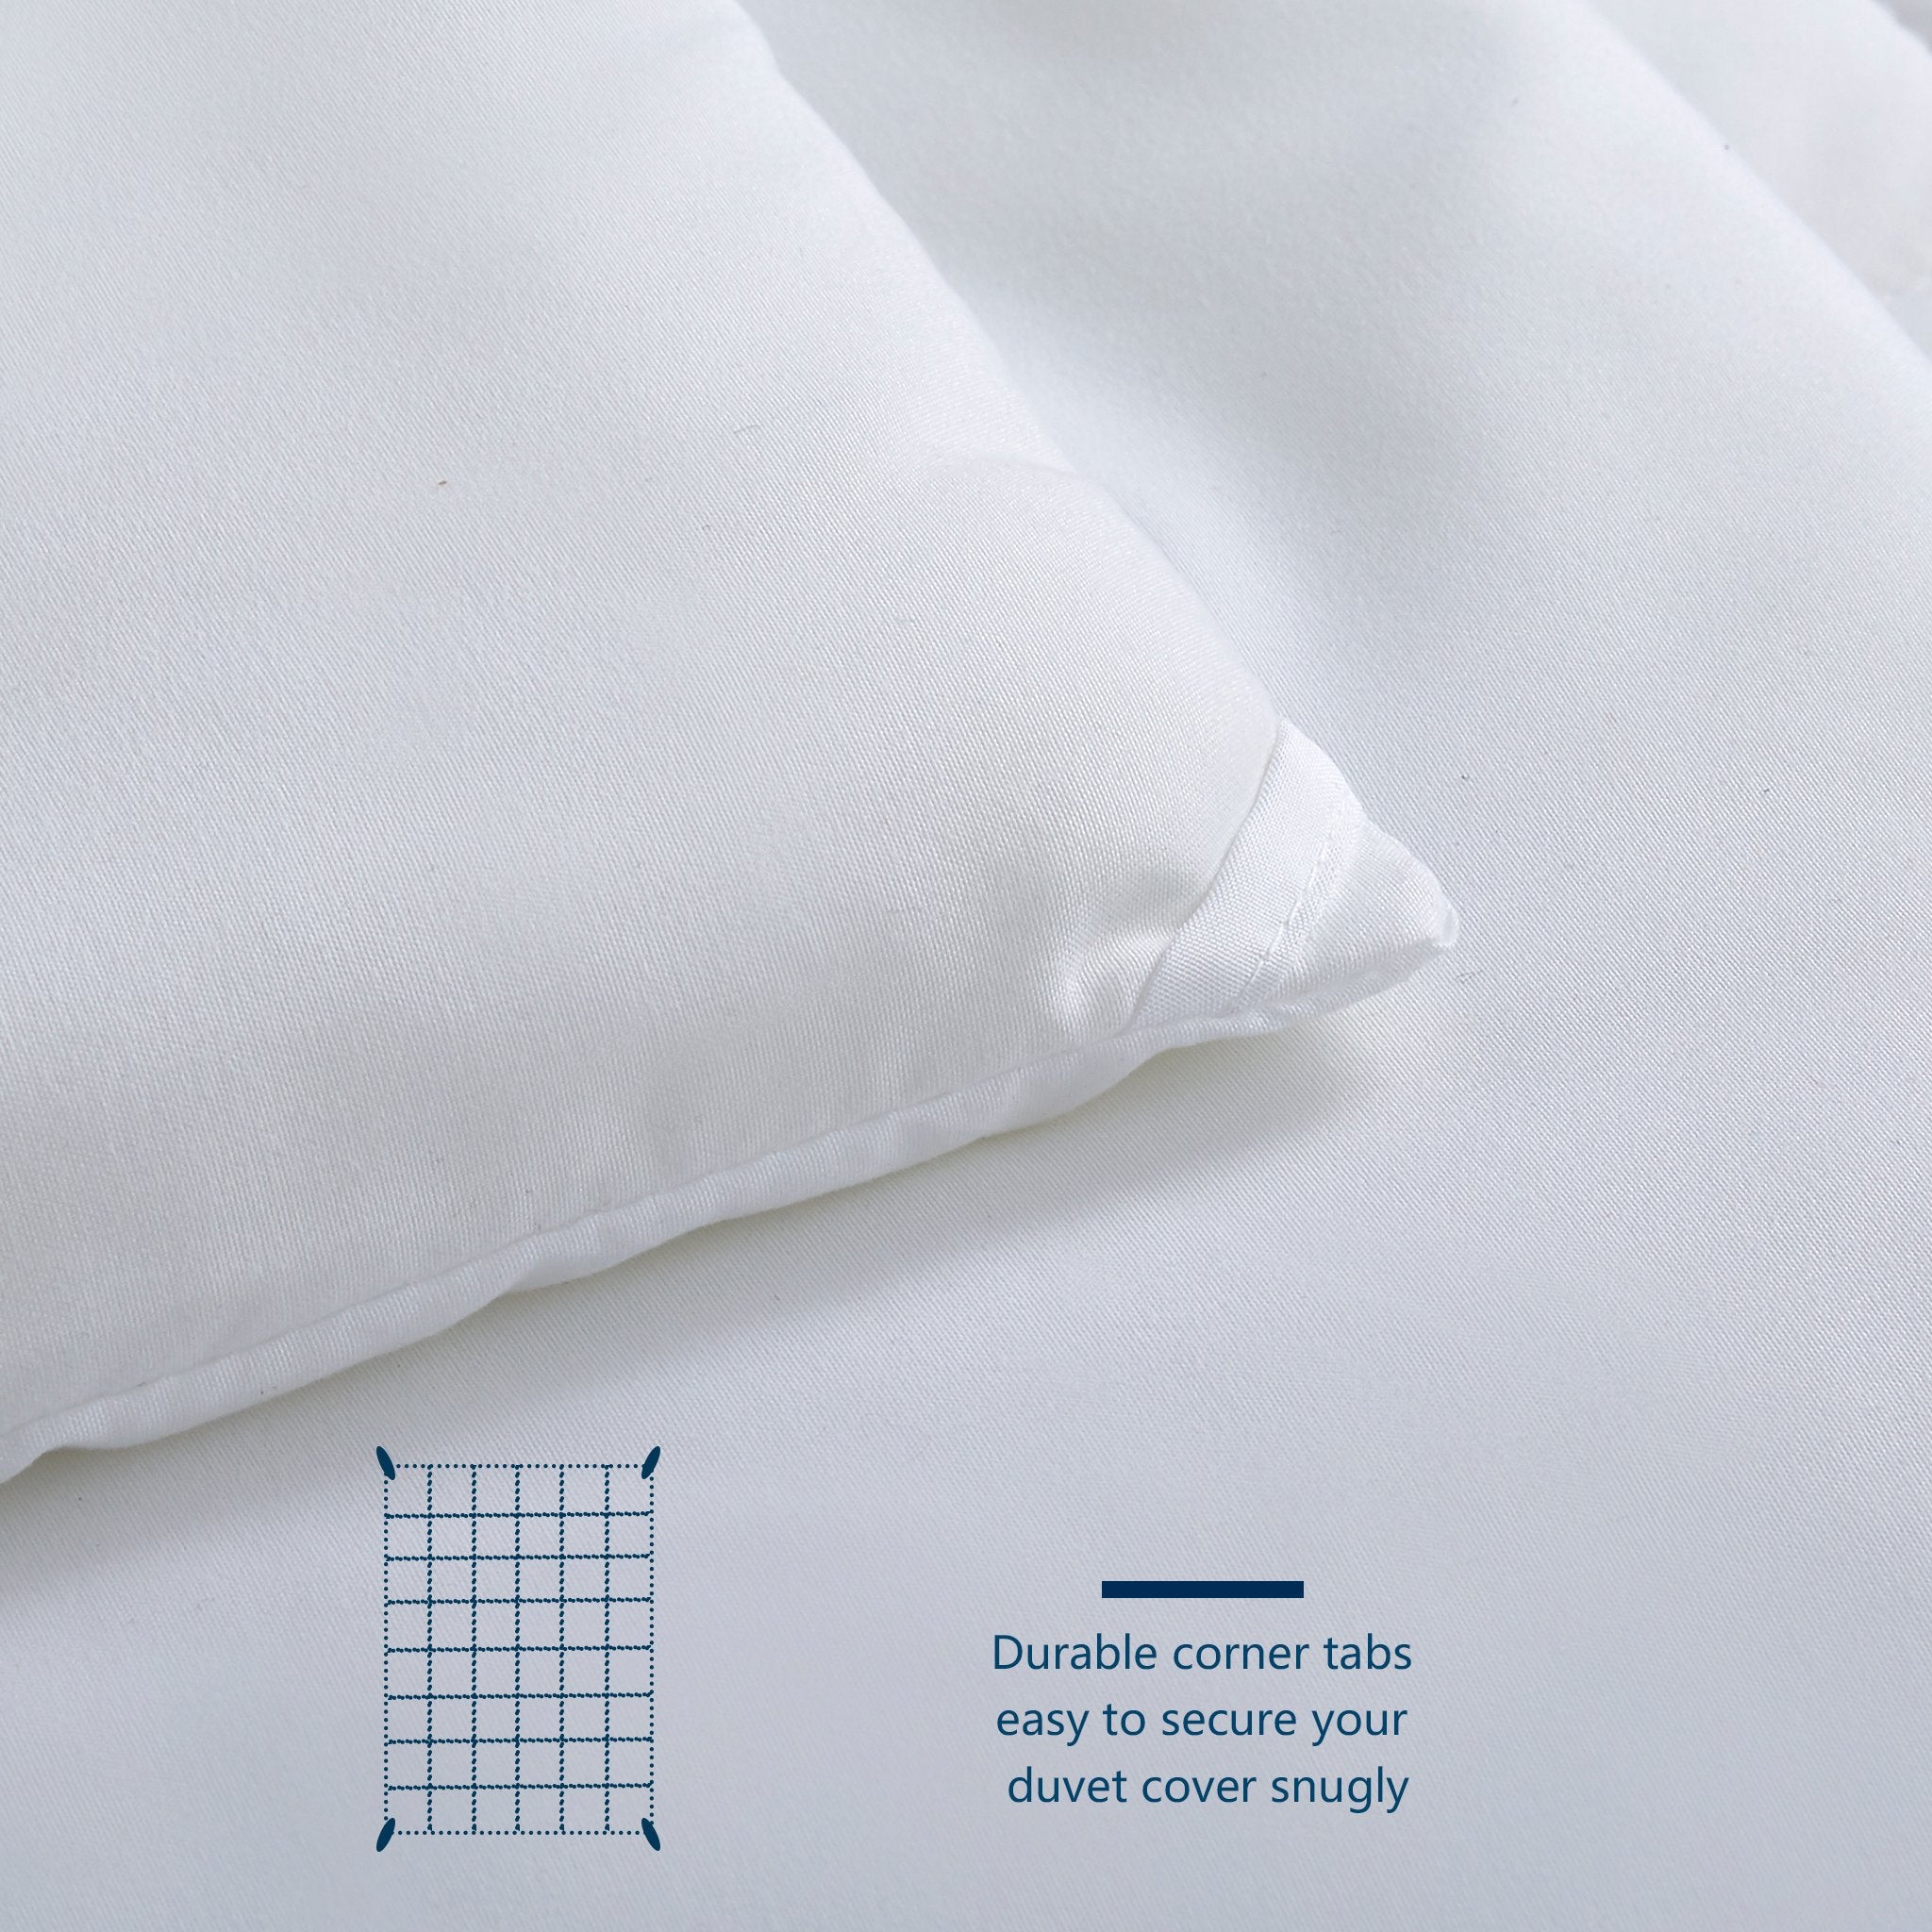 CozyLux Queen Size Bedding Comforter Duvet Insert - Quilted White Comforters with Corner Tabs, 1800 Series Soft Siliconized Fiberfill All Season Down